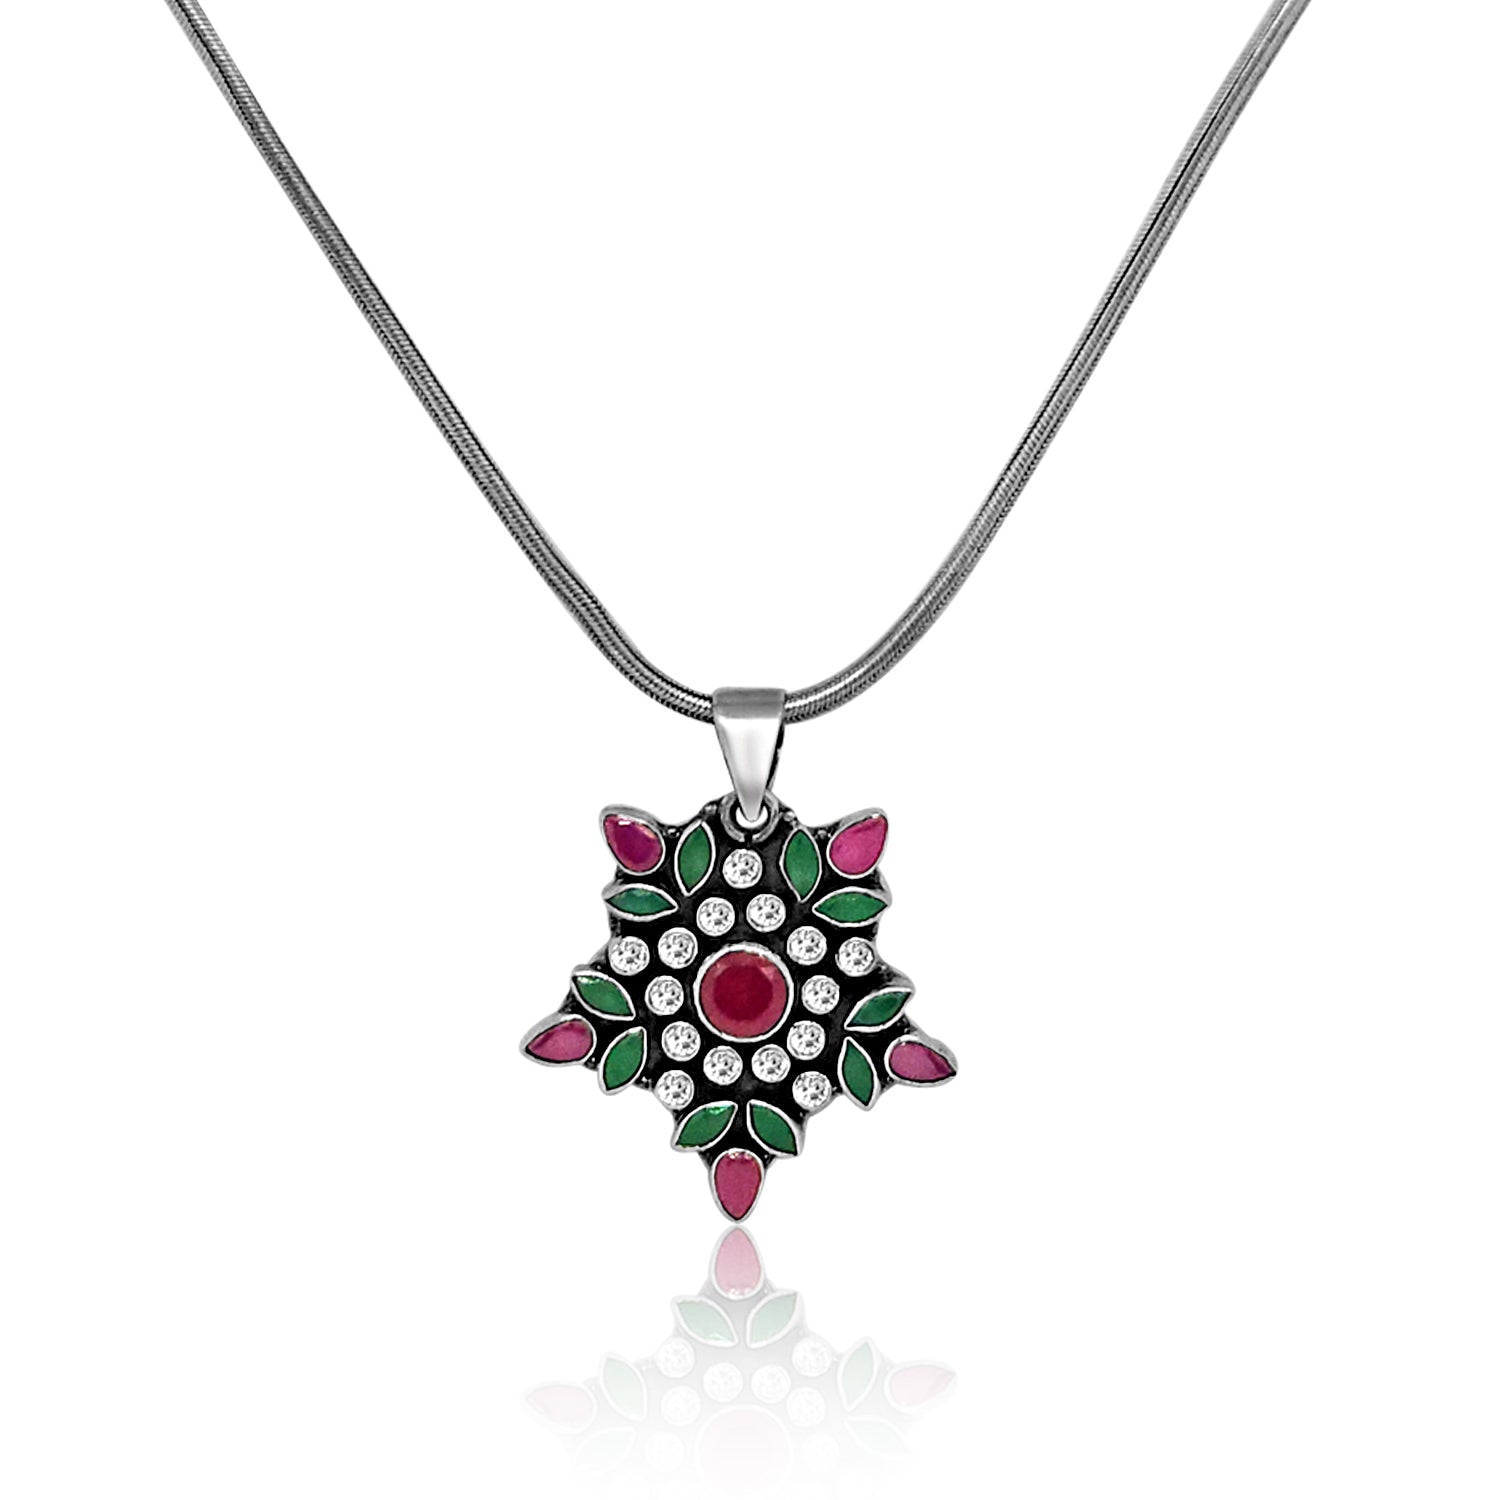 Silver Oxidized Multitone Gemstone Floral Celebration Pendant with Snake Chain